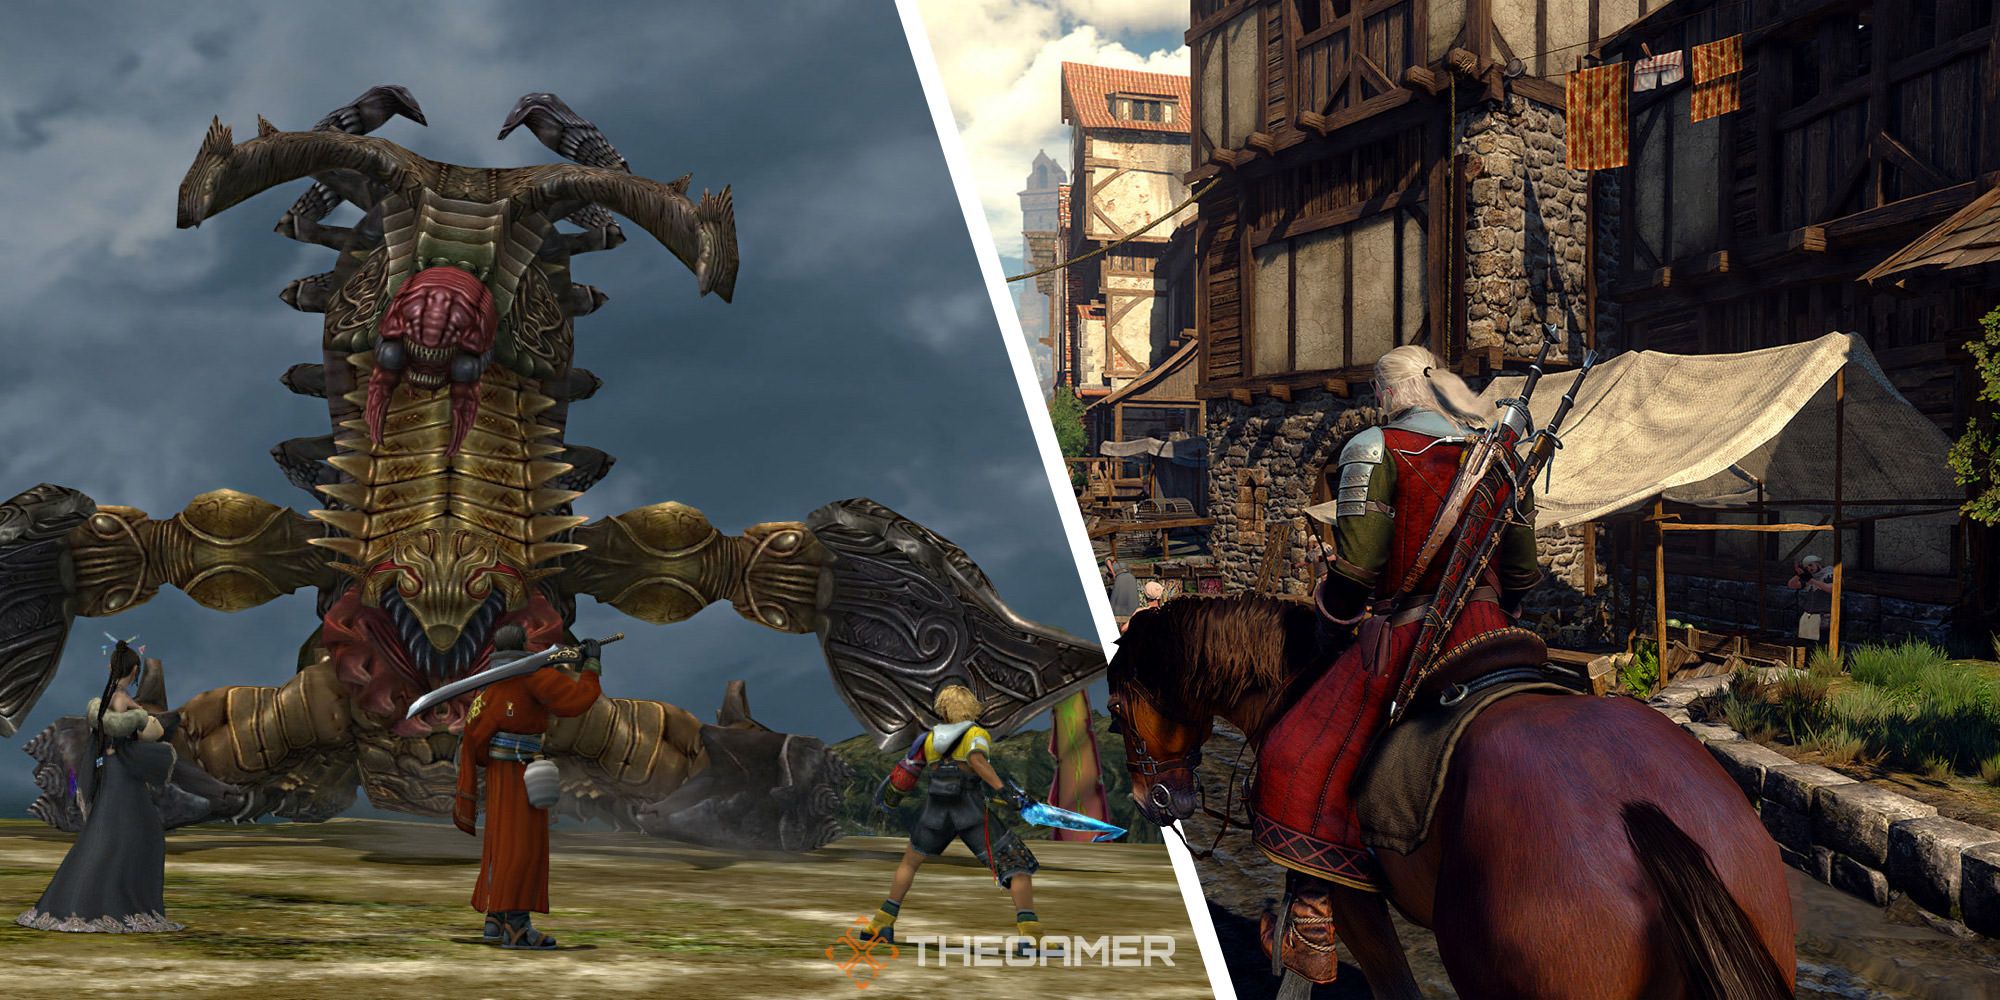 Split image of Final Fantasy 10 and The Witcher 3